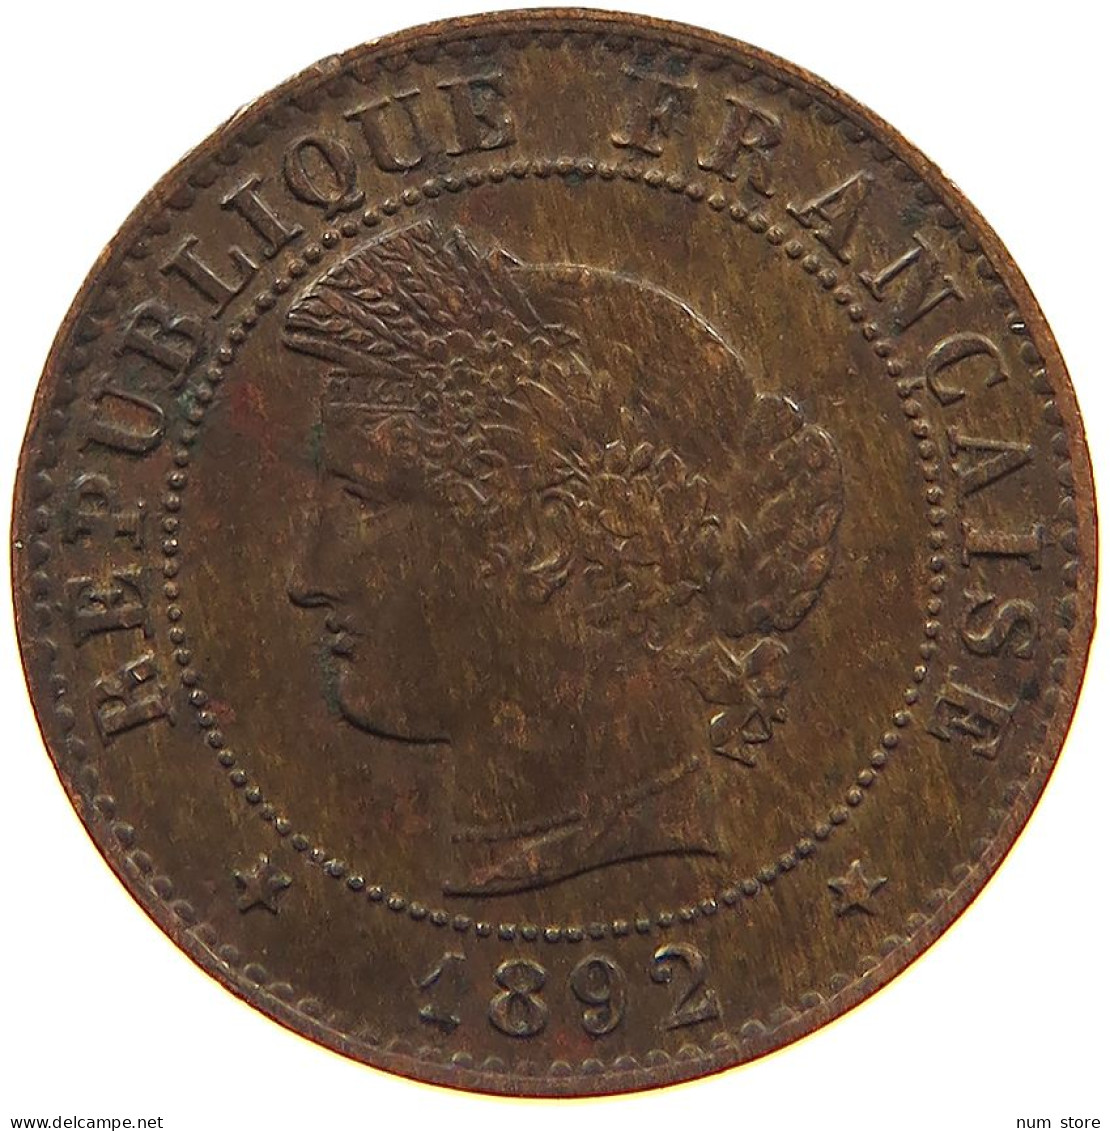 FRANCE 1 CENTIME 1892 A #s081 0293 - 1 Centime